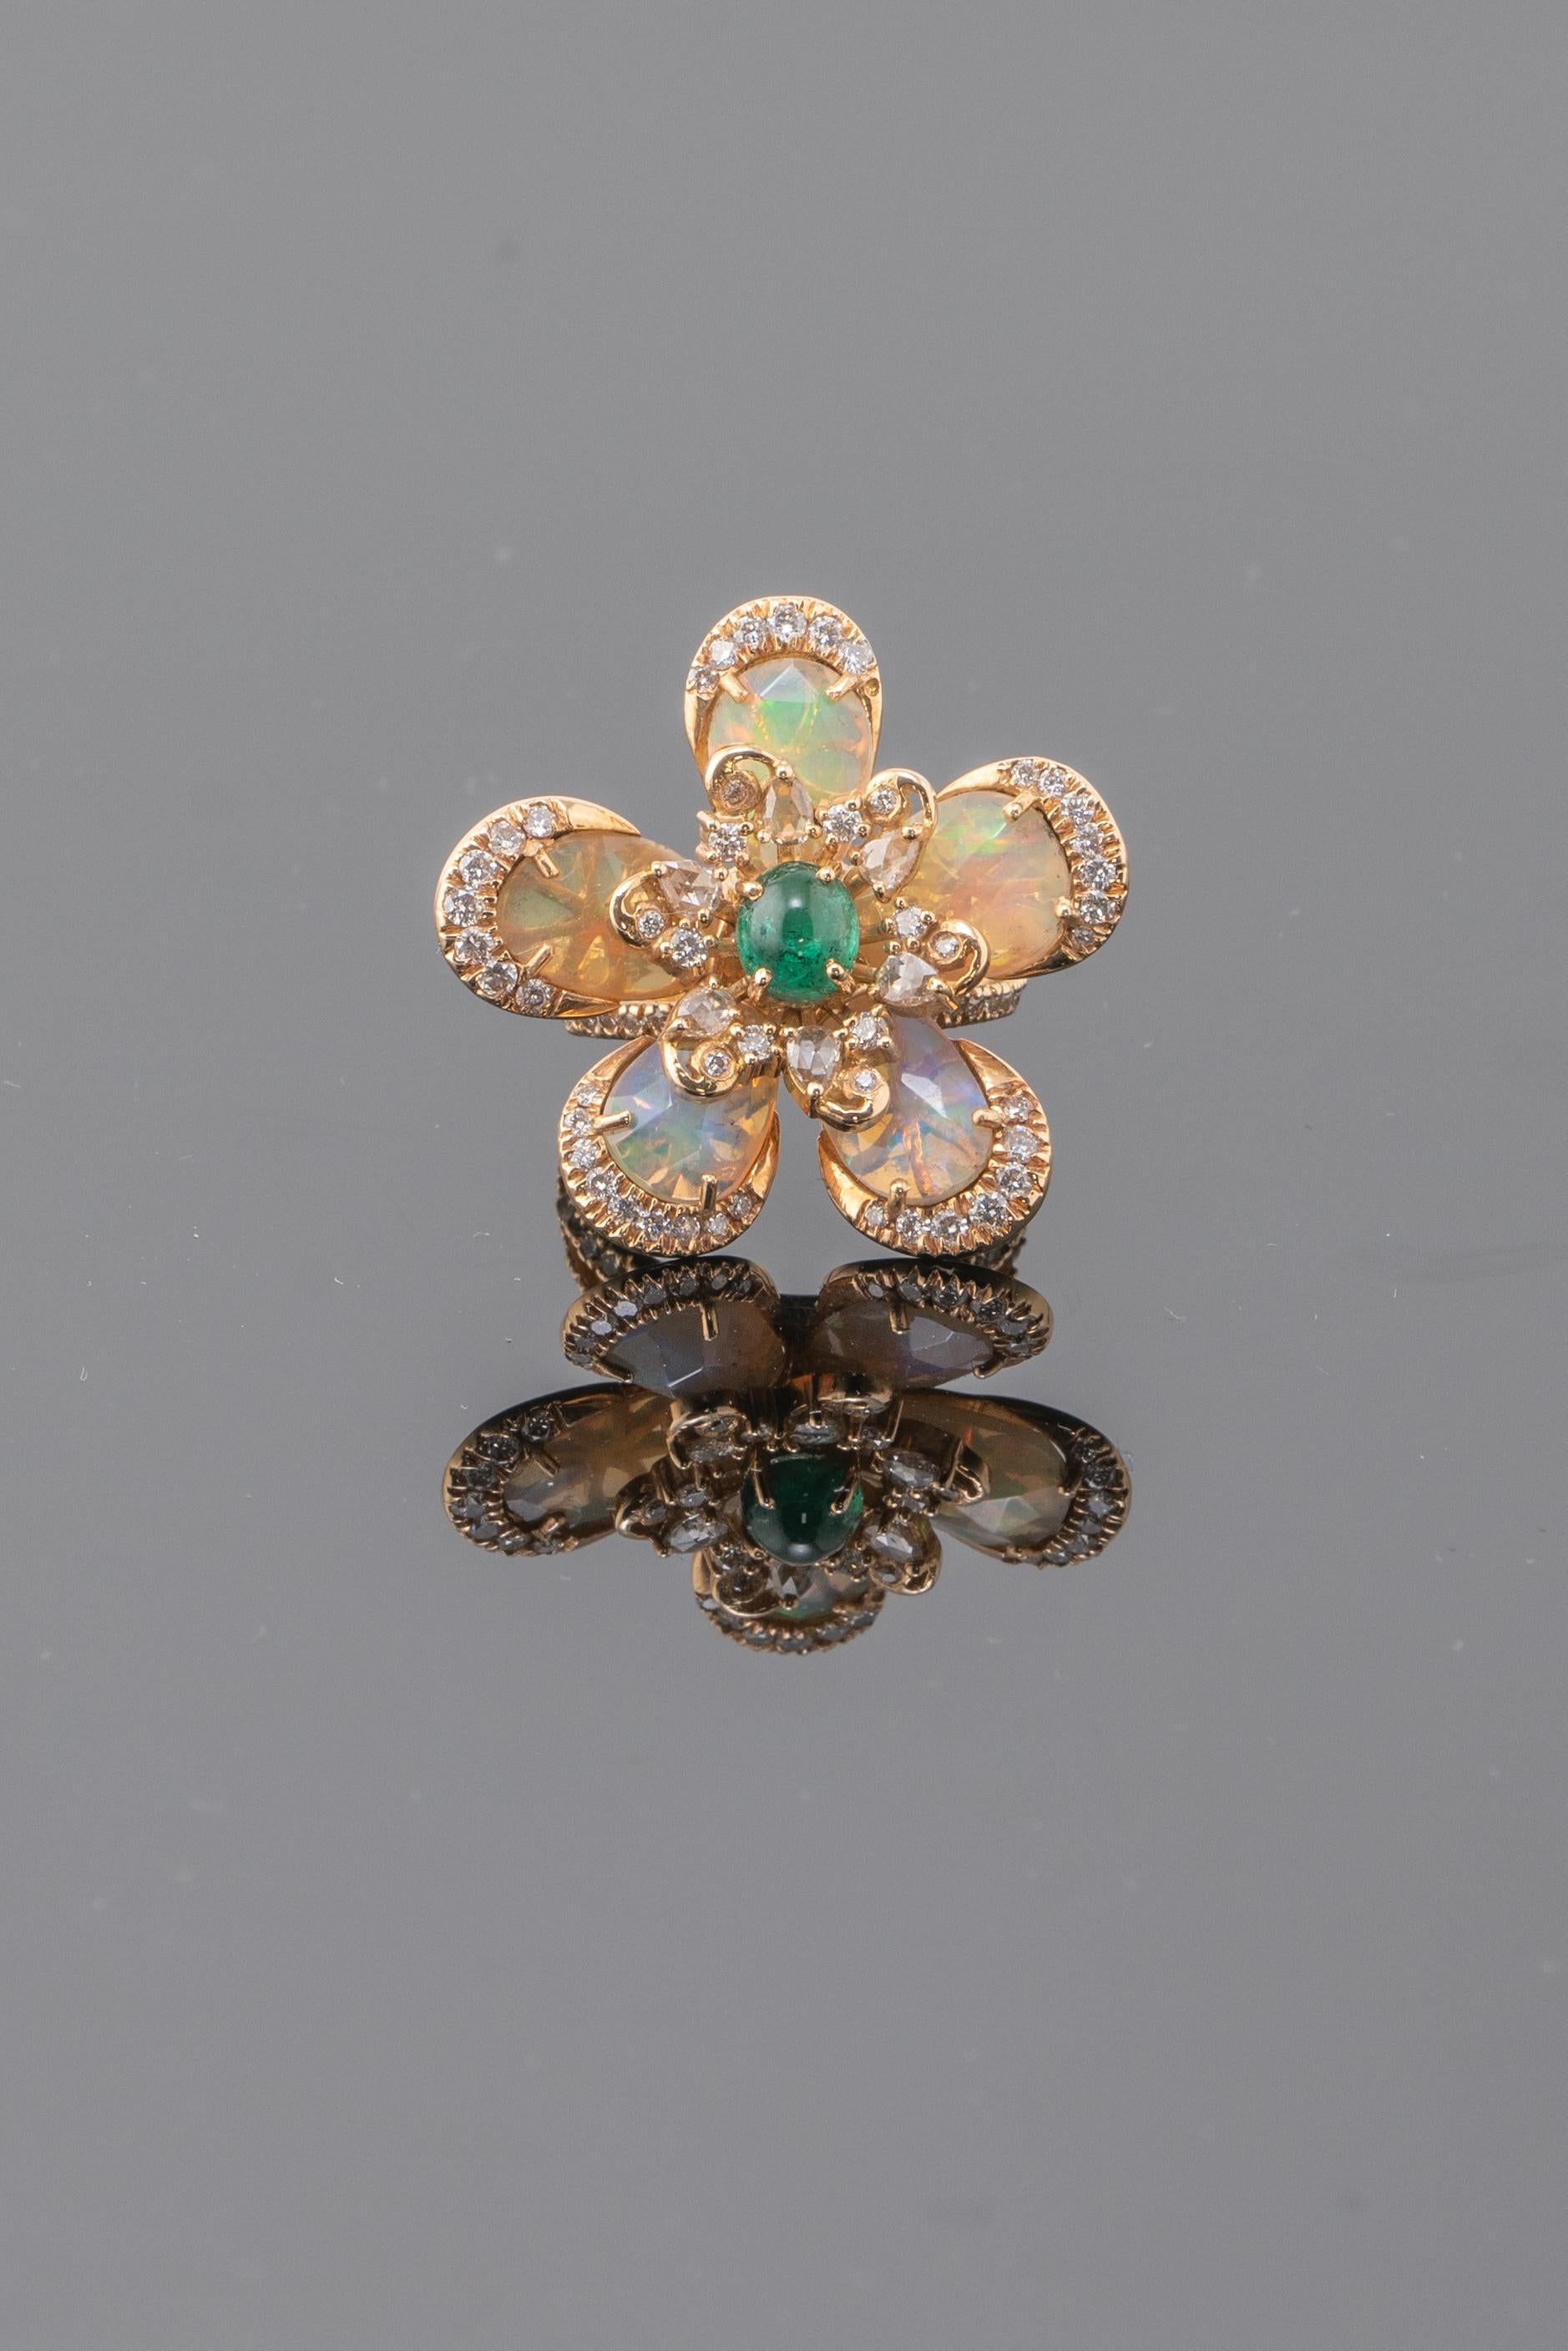 A statement, intricately hand-made cocktail ring. Using 4 carat fancy rose-cut, Ethiopian Opal floral ring with Zambian Emerald and Diamonds set in solid 18K yellow gold. 

Stone Details: 
Stone: Opal
Carat Weight: 4 Carats

Diamond Details: 
Total